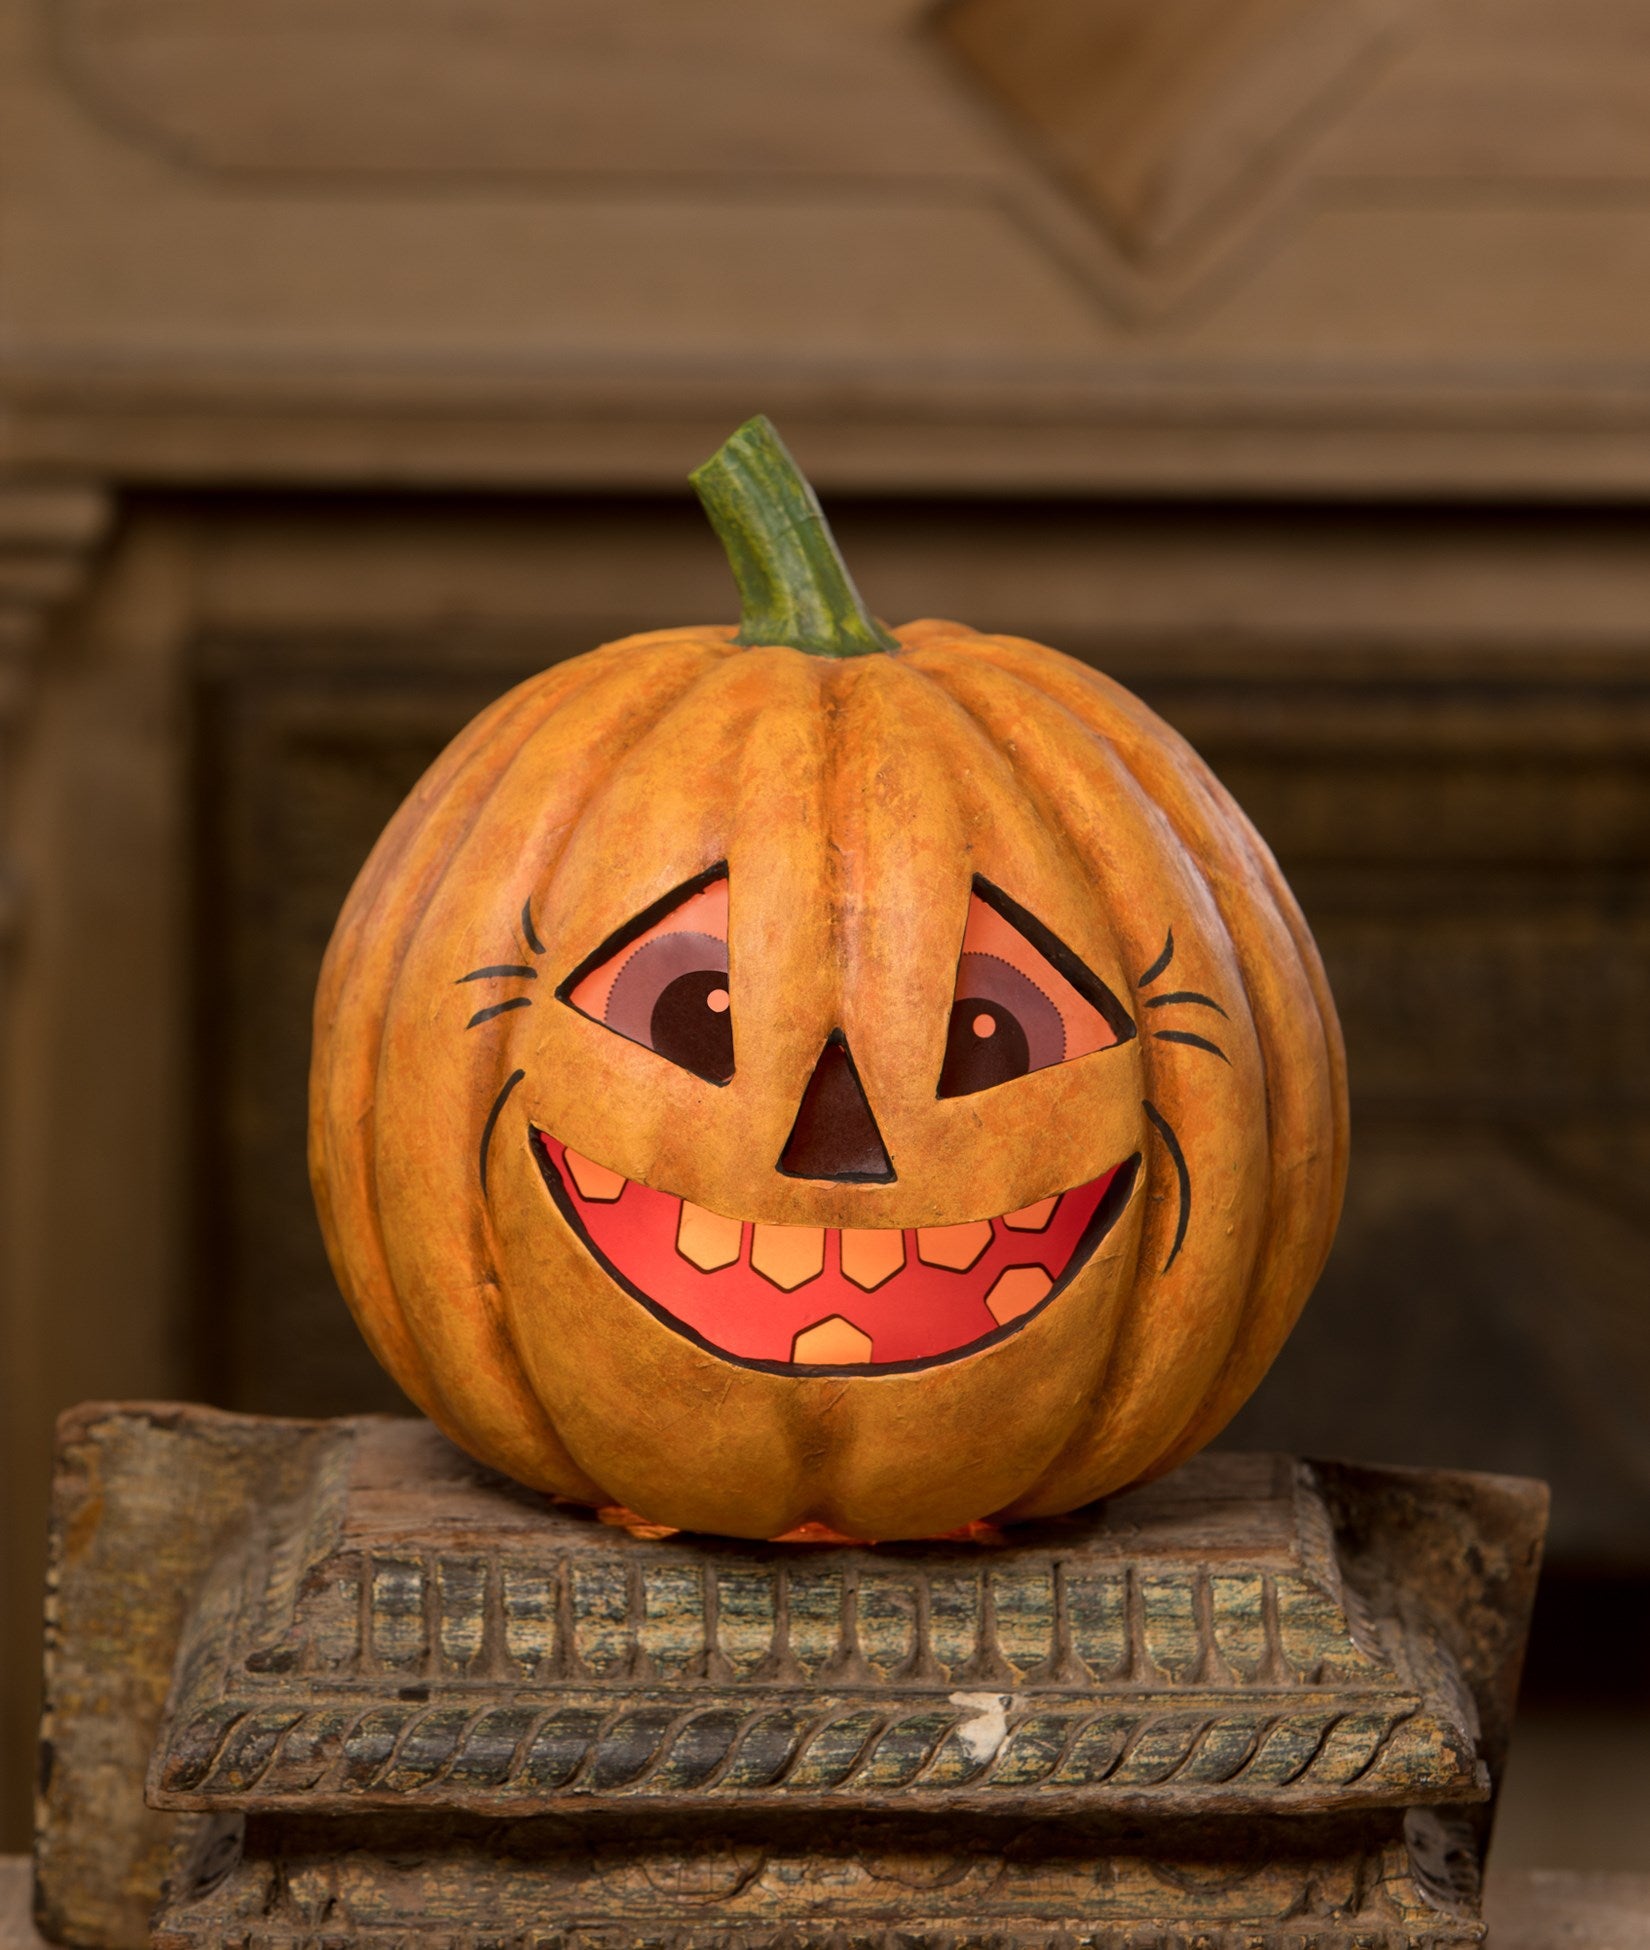 Perky Pumpkin Luminary, Paper mache Jack-O-Lantern with Vellum eyes and mouth